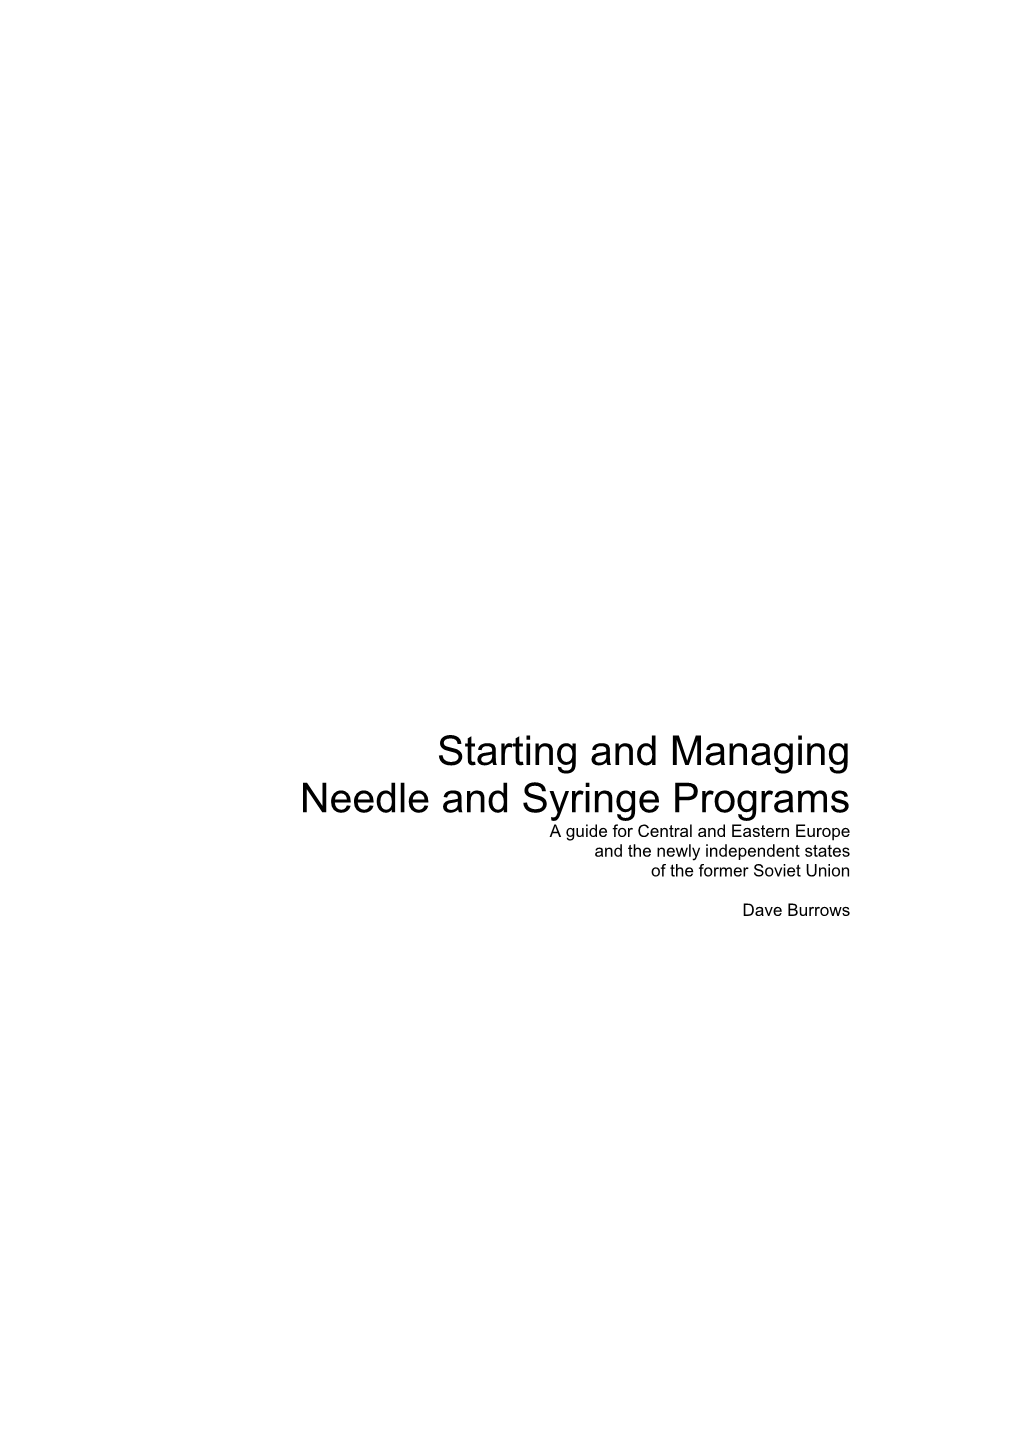 Starting and Managing Needle and Syringe Programs a Guide for Central and Eastern Europe and the Newly Independent States of the Former Soviet Union